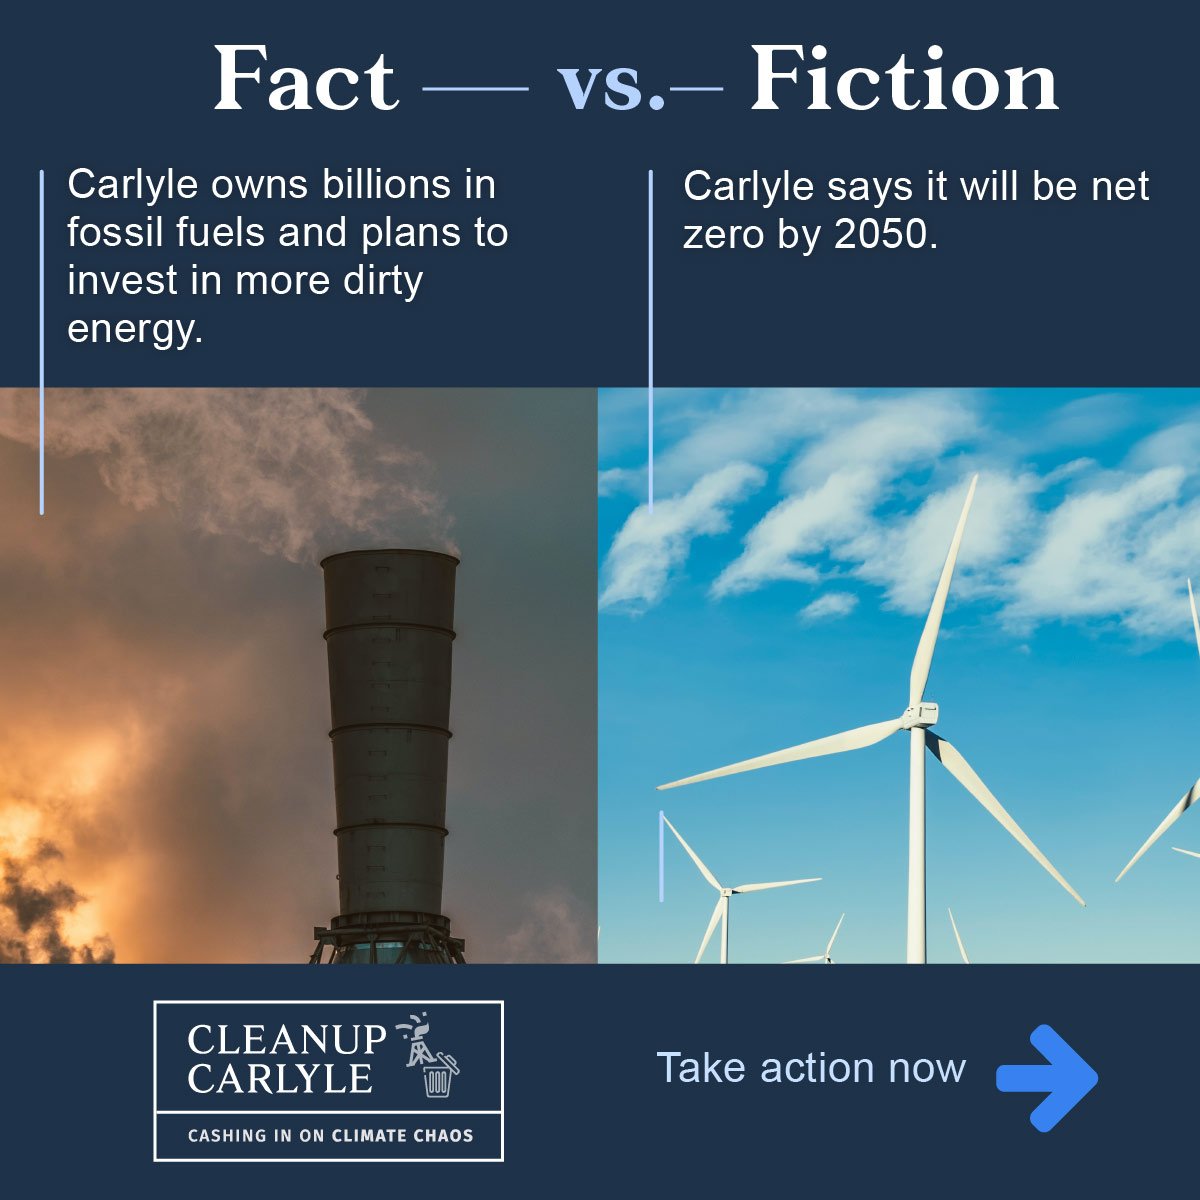 Graphic with "Fact: Carlyle owns billions in fossil fuels and plans to invest in more dirty energy" vs "Fiction: Carlyle says it will be net zero by 2050"